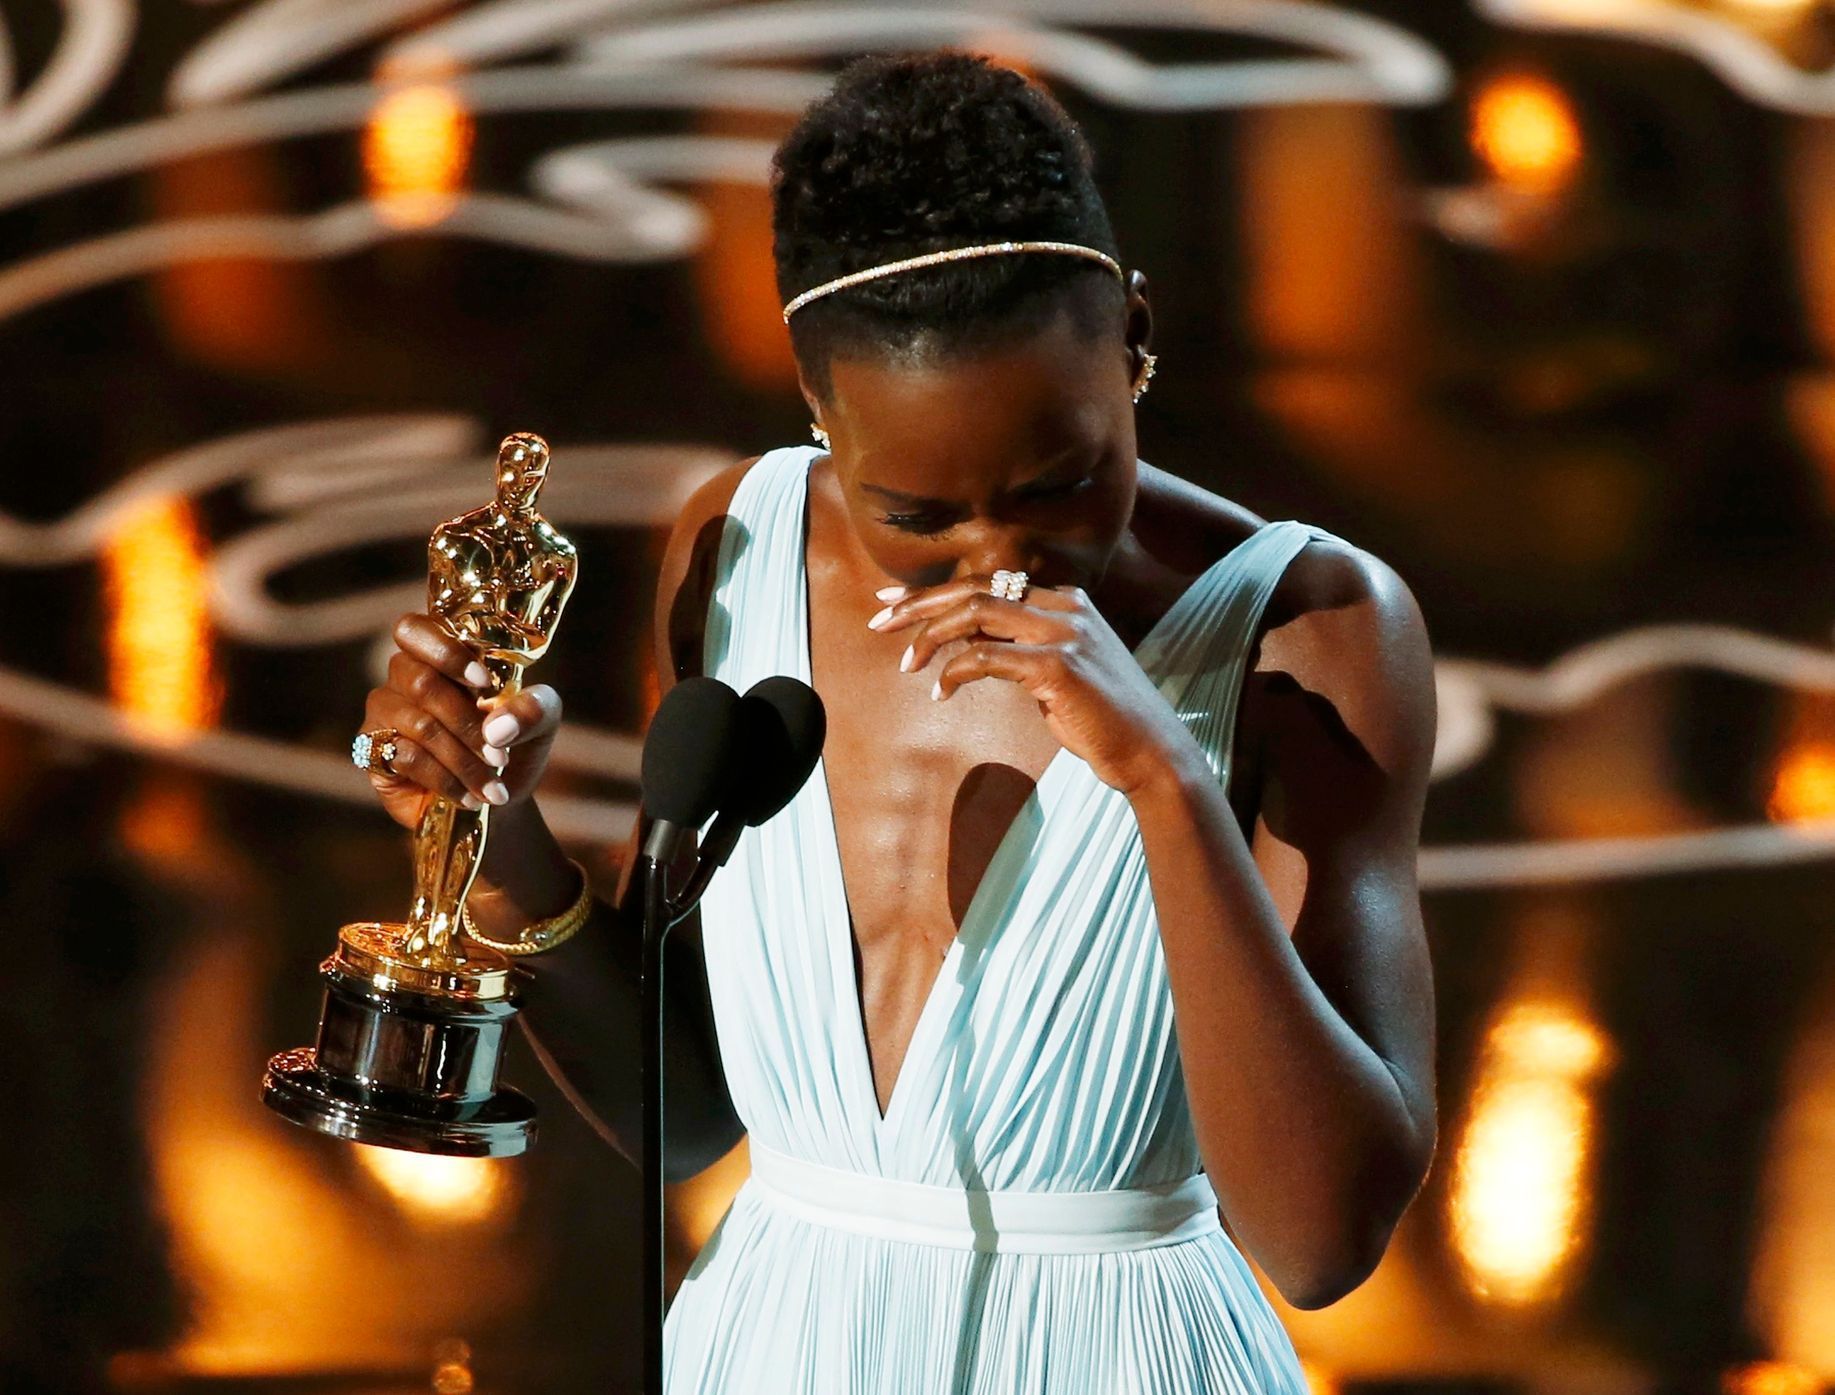 Nyong'o, best supporting actress winner for her role in &quot;12 Years a Slave&quot;, racts on stage at the 86th Academy Awards in Hollywood